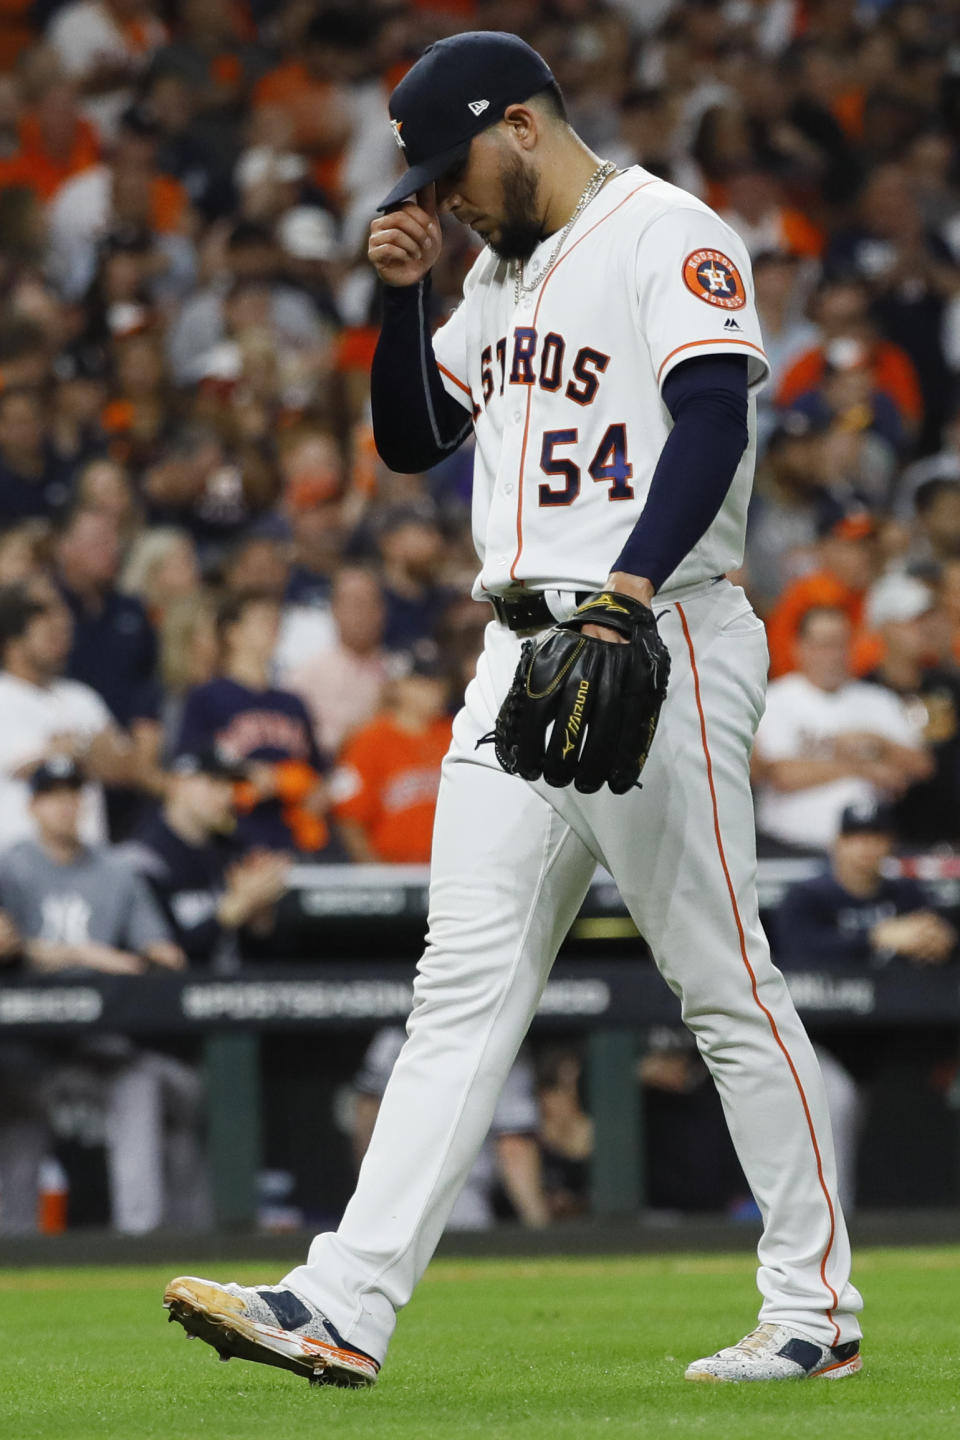 Houston Astros relief pitcher Roberto Osuna reacts after giving up a two-run home run to New York Yankees' DJ LeMahieu during the ninth inning in Game 6 of baseball's American League Championship Series Saturday, Oct. 19, 2019, in Houston. (AP Photo/Matt Slocum)